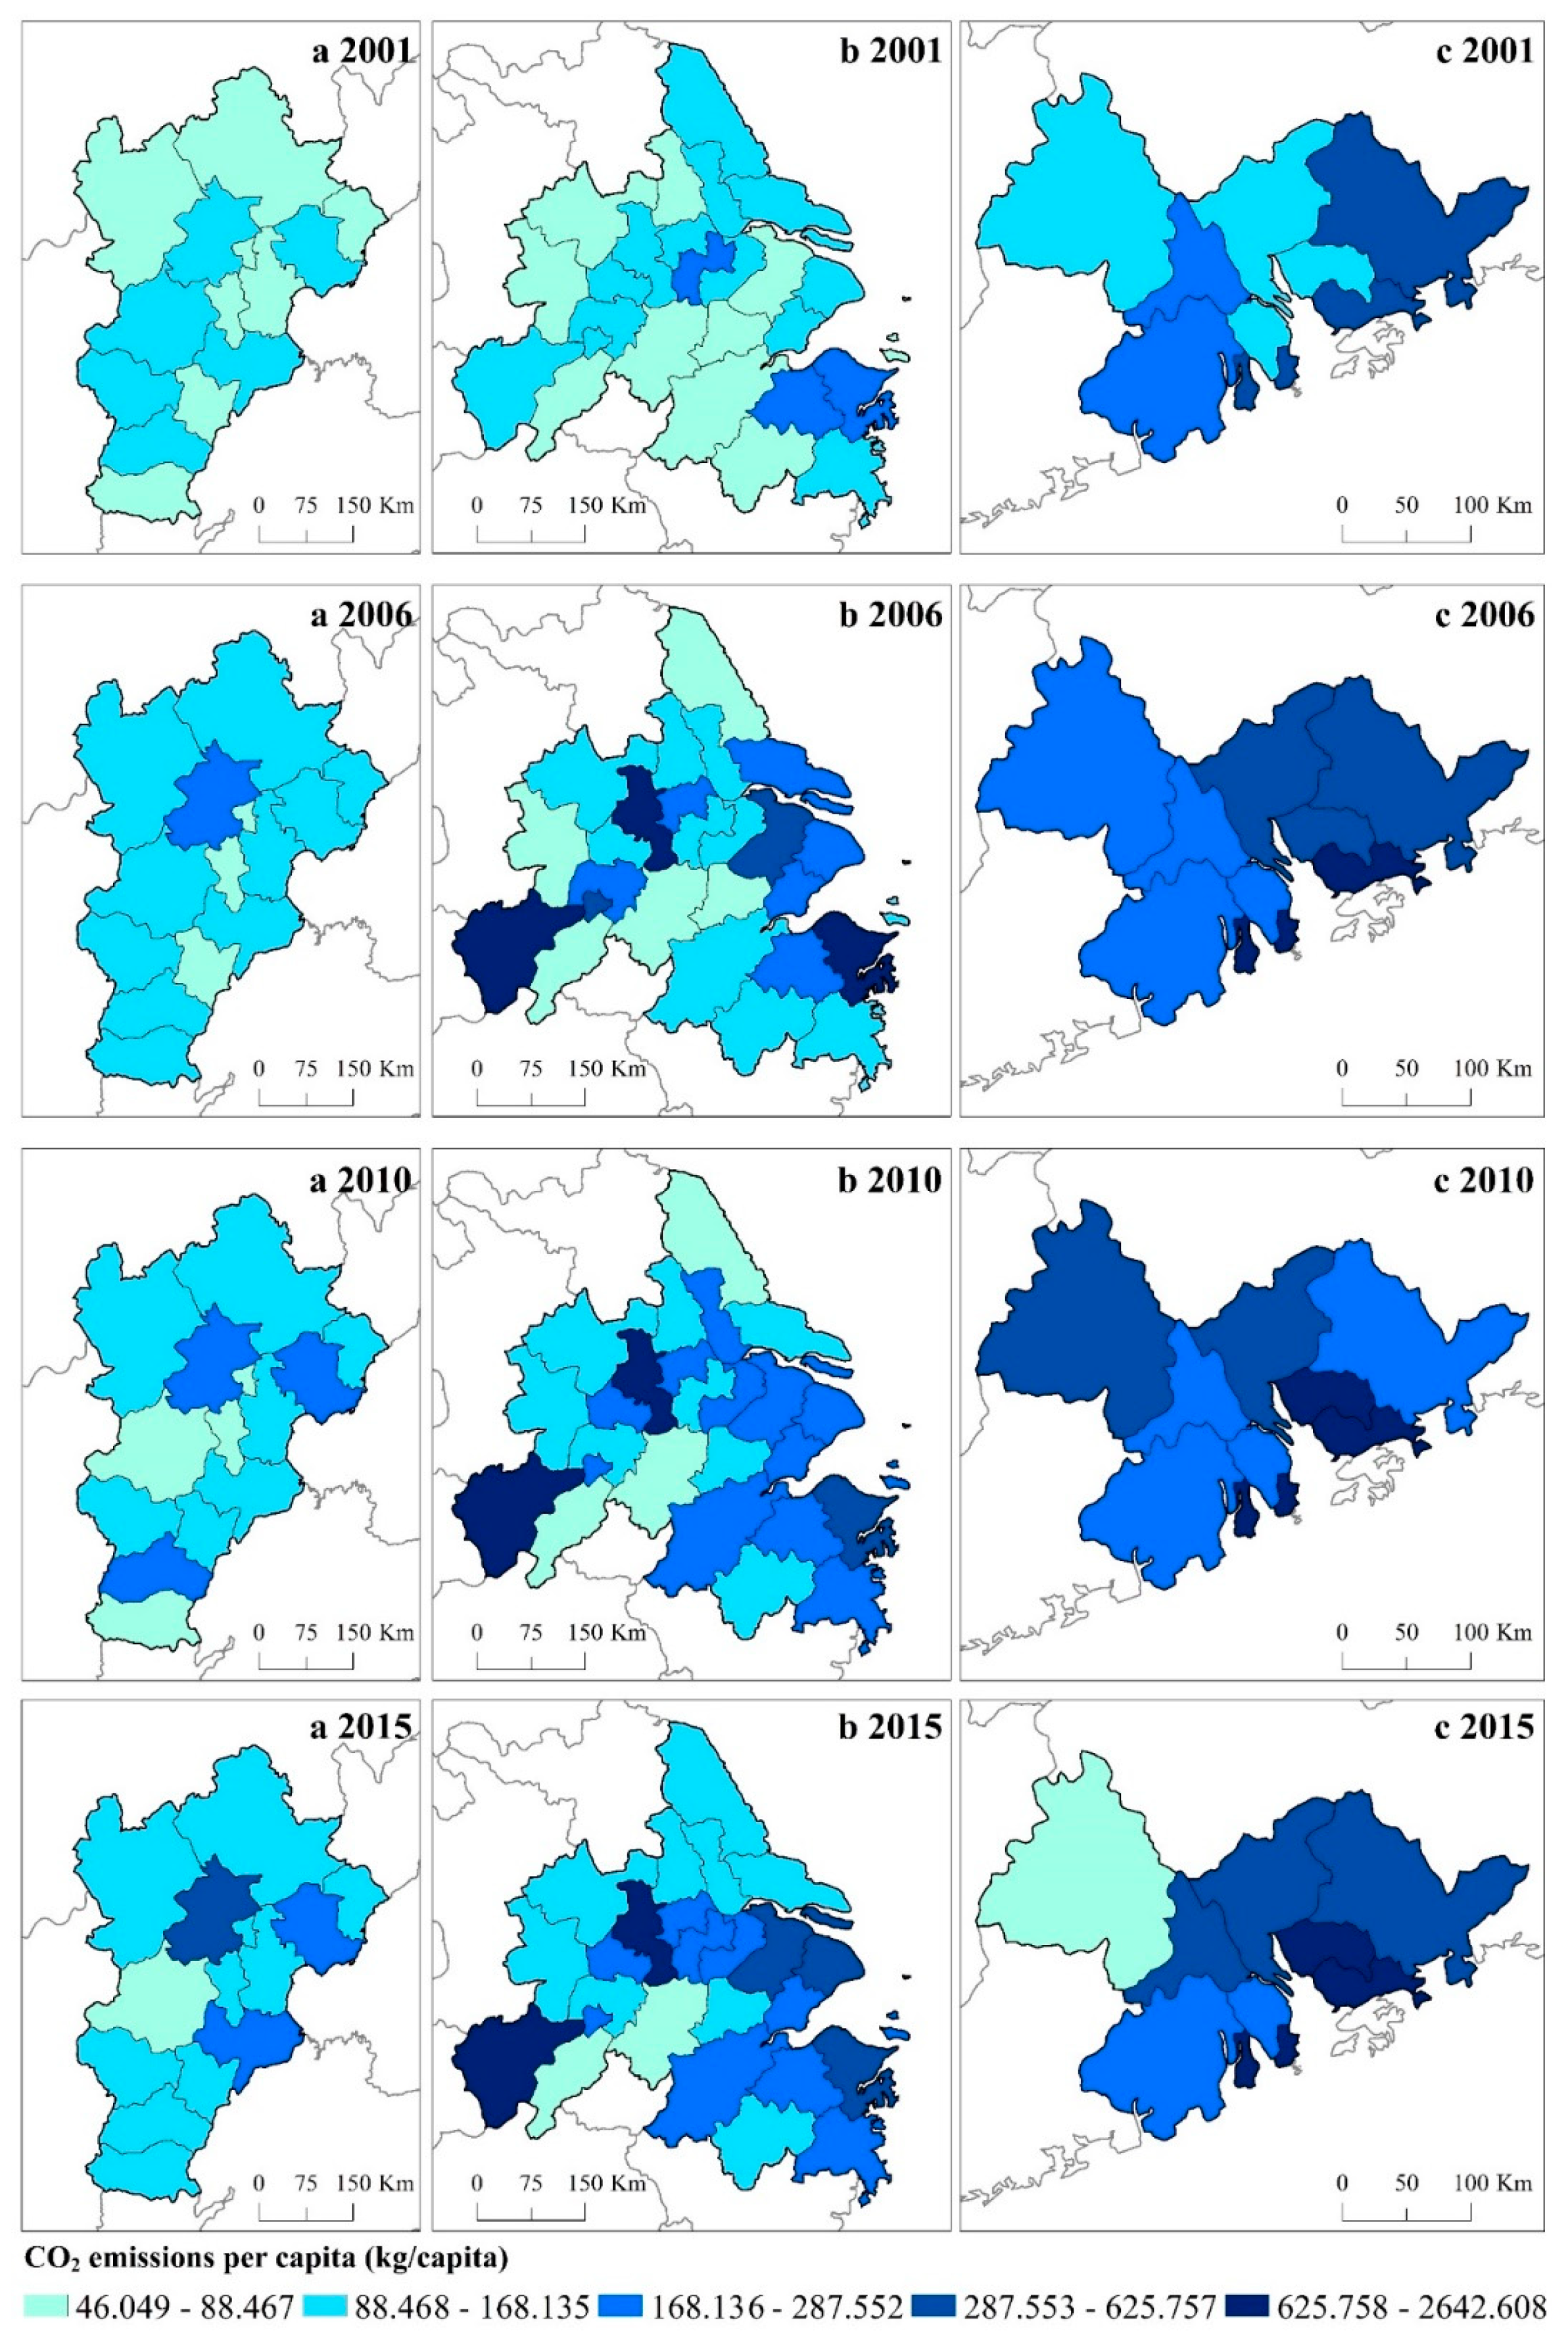 Sustainability Free Full Text The Moderating Effect Of Innovation On The Relationship Between Urbanization And Co2 Emissions Evidence From Three Major Urban Agglomerations In China Html